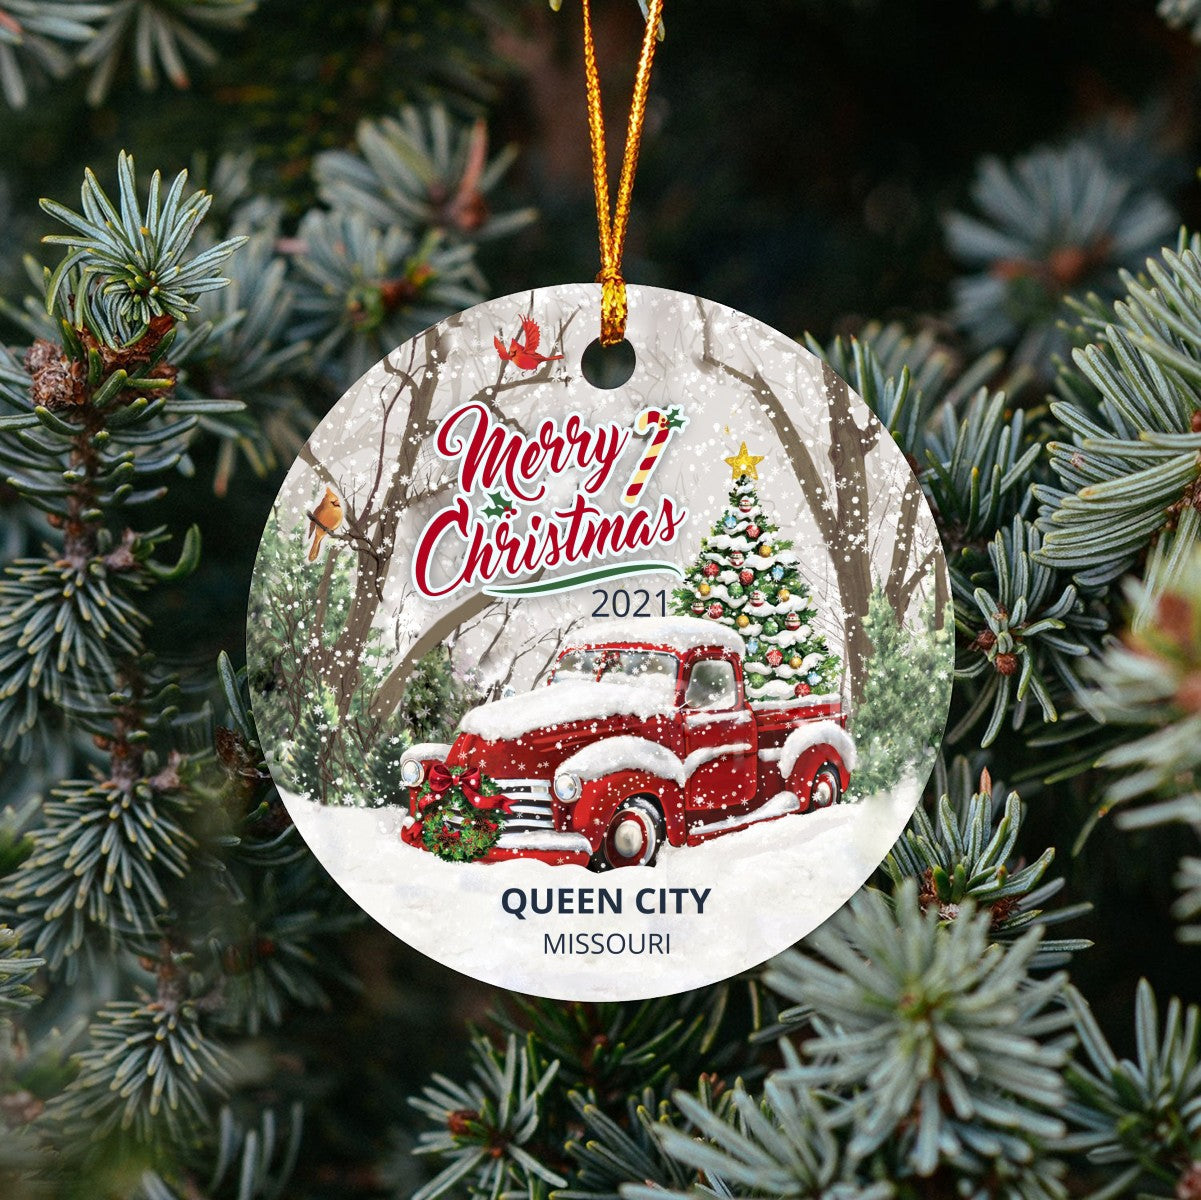 Christmas Tree Ornaments Queen City - Ornament With Name City, State Queen City Missouri MO Ornament - Red Truck Xmas Ornaments 3'' Plastic Gift For Family, Friend And Housewarming